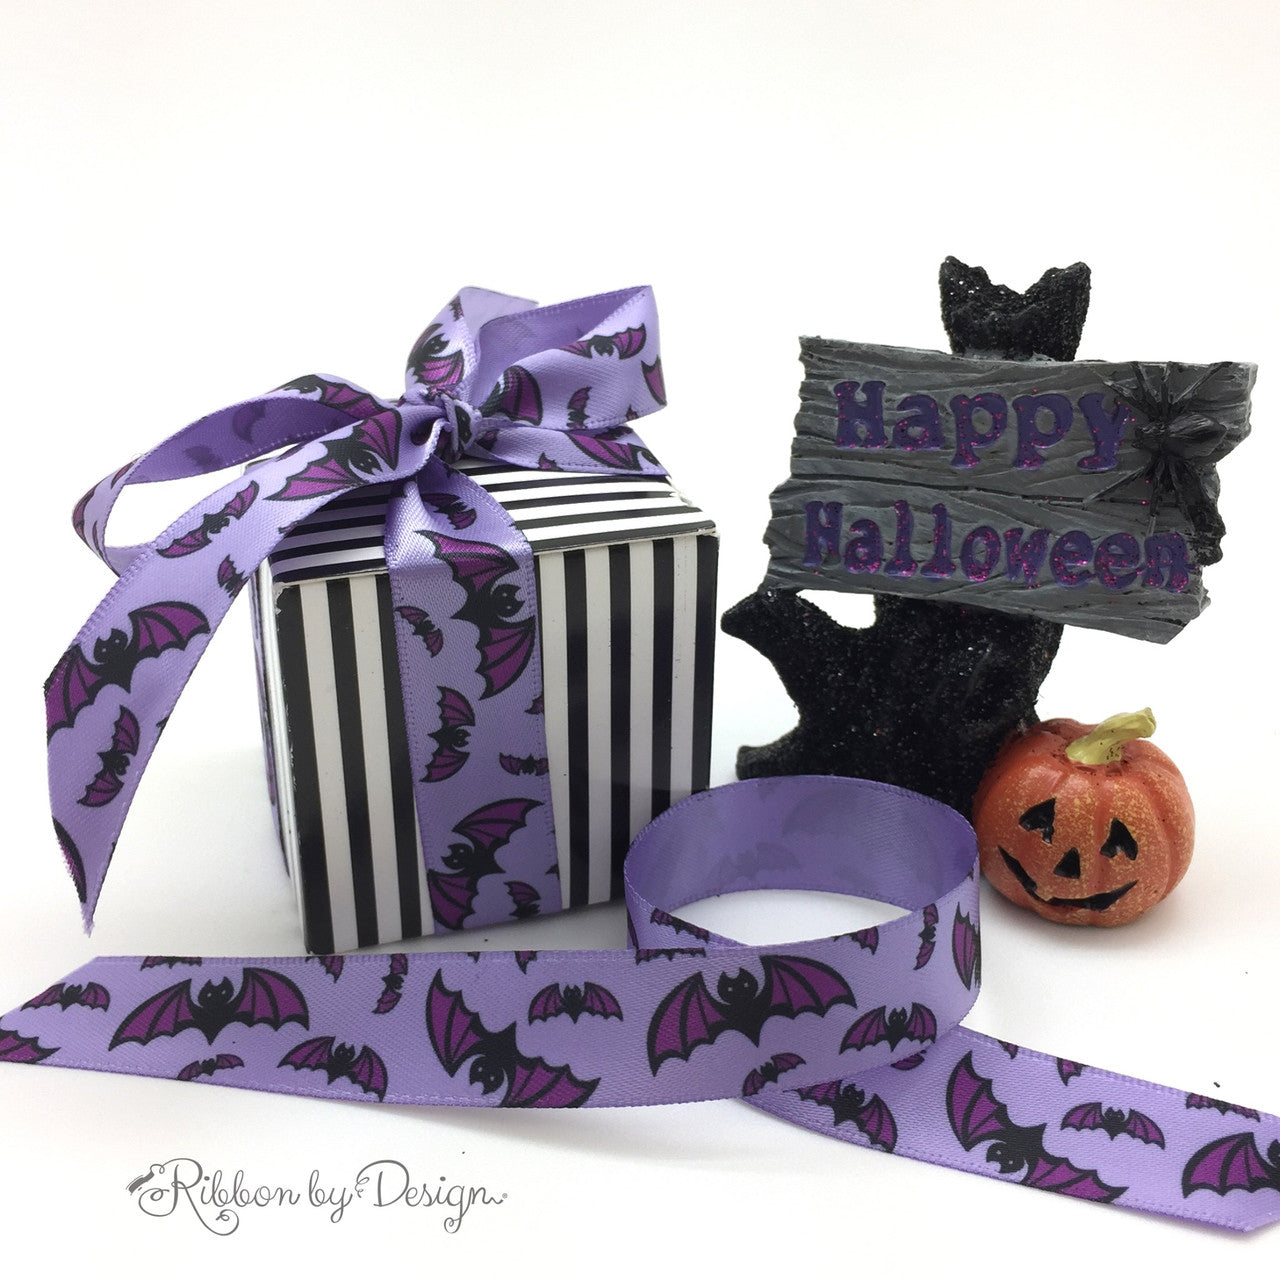 Our purple bats are the perfect topping to Halloween gifts and treats!